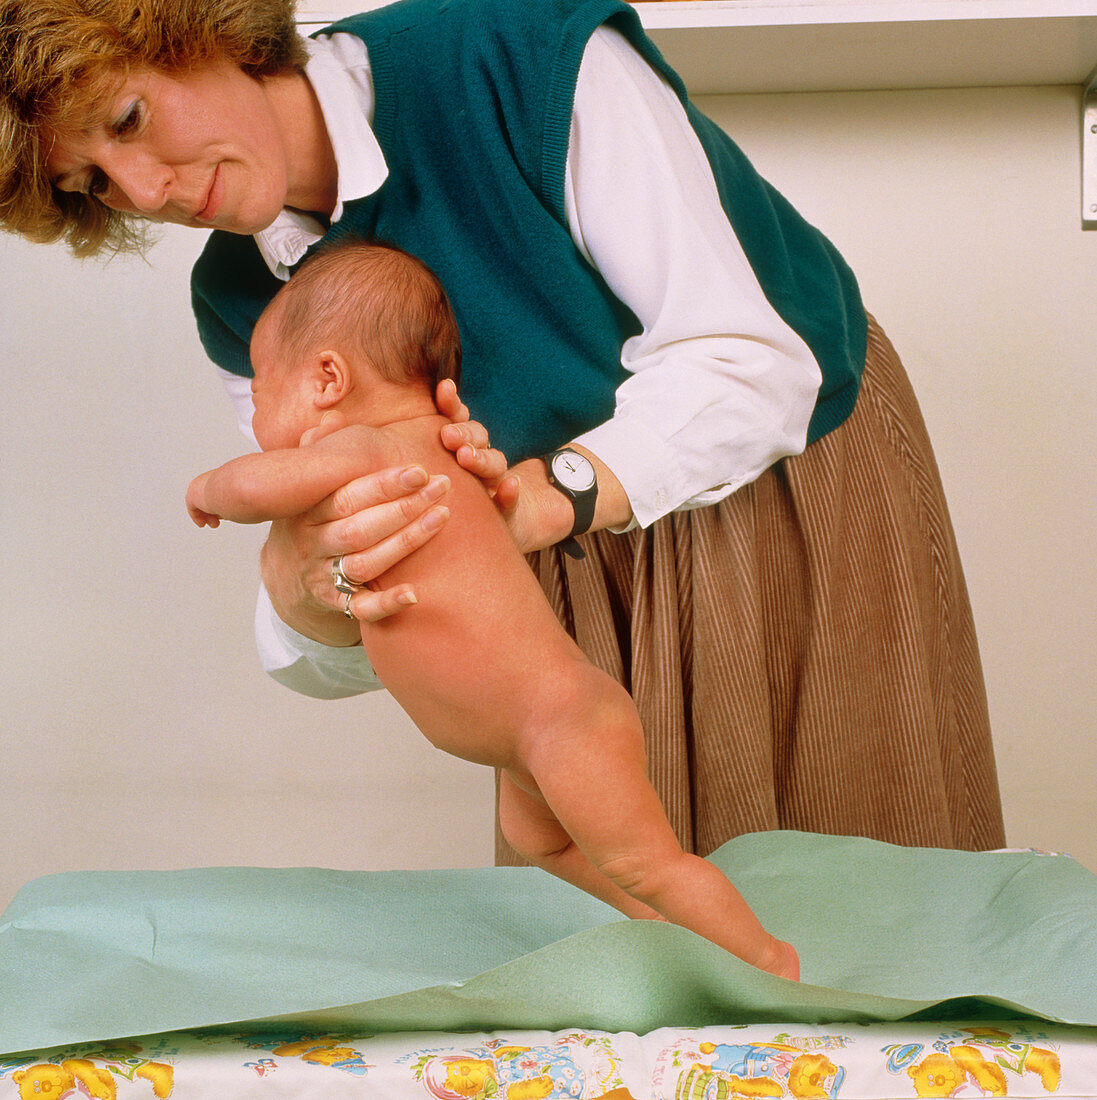 Doctor testing the stepping reflex of a baby